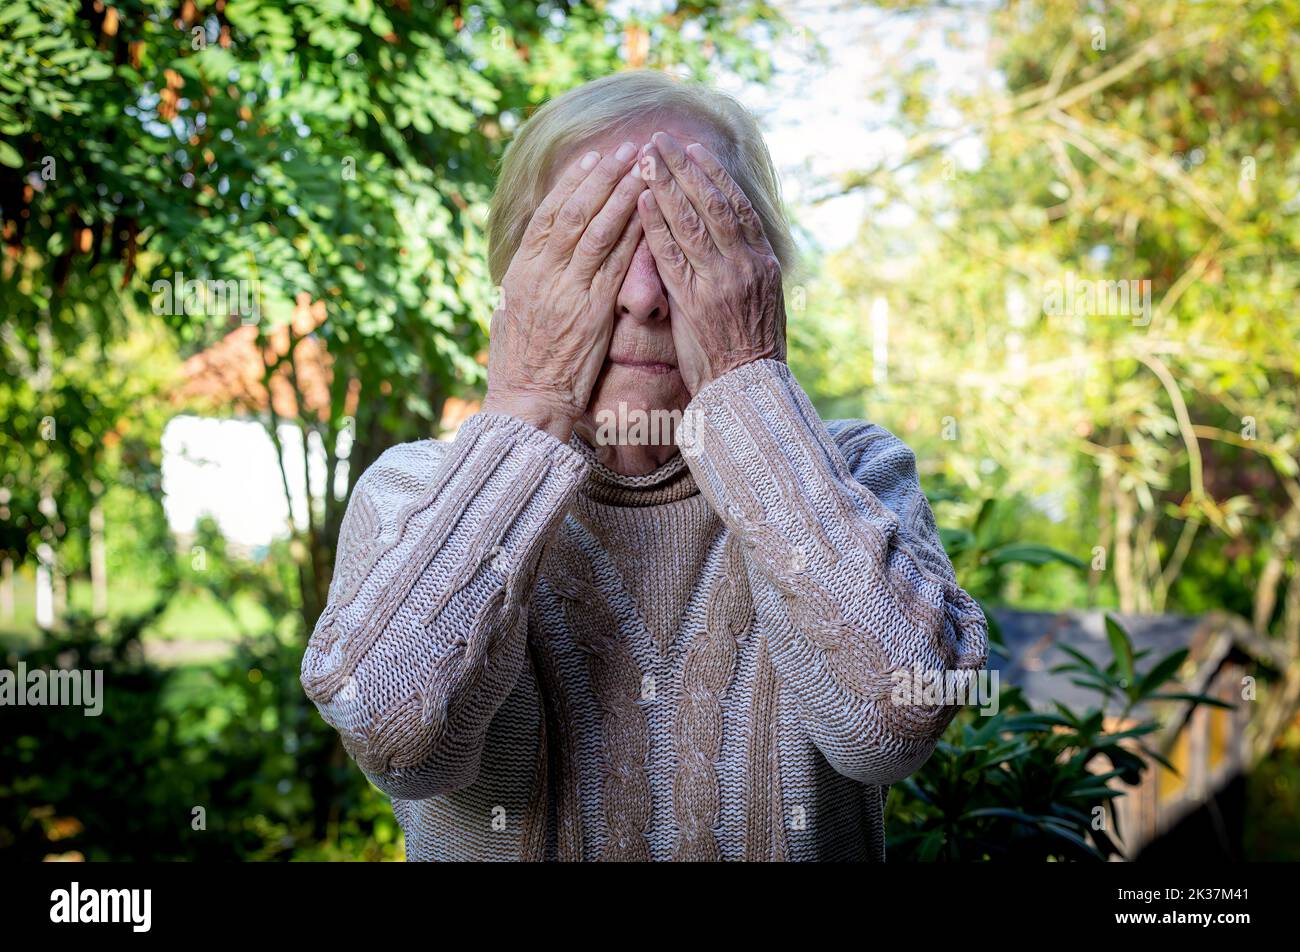 old woman covering her face with her hands Stock Photo